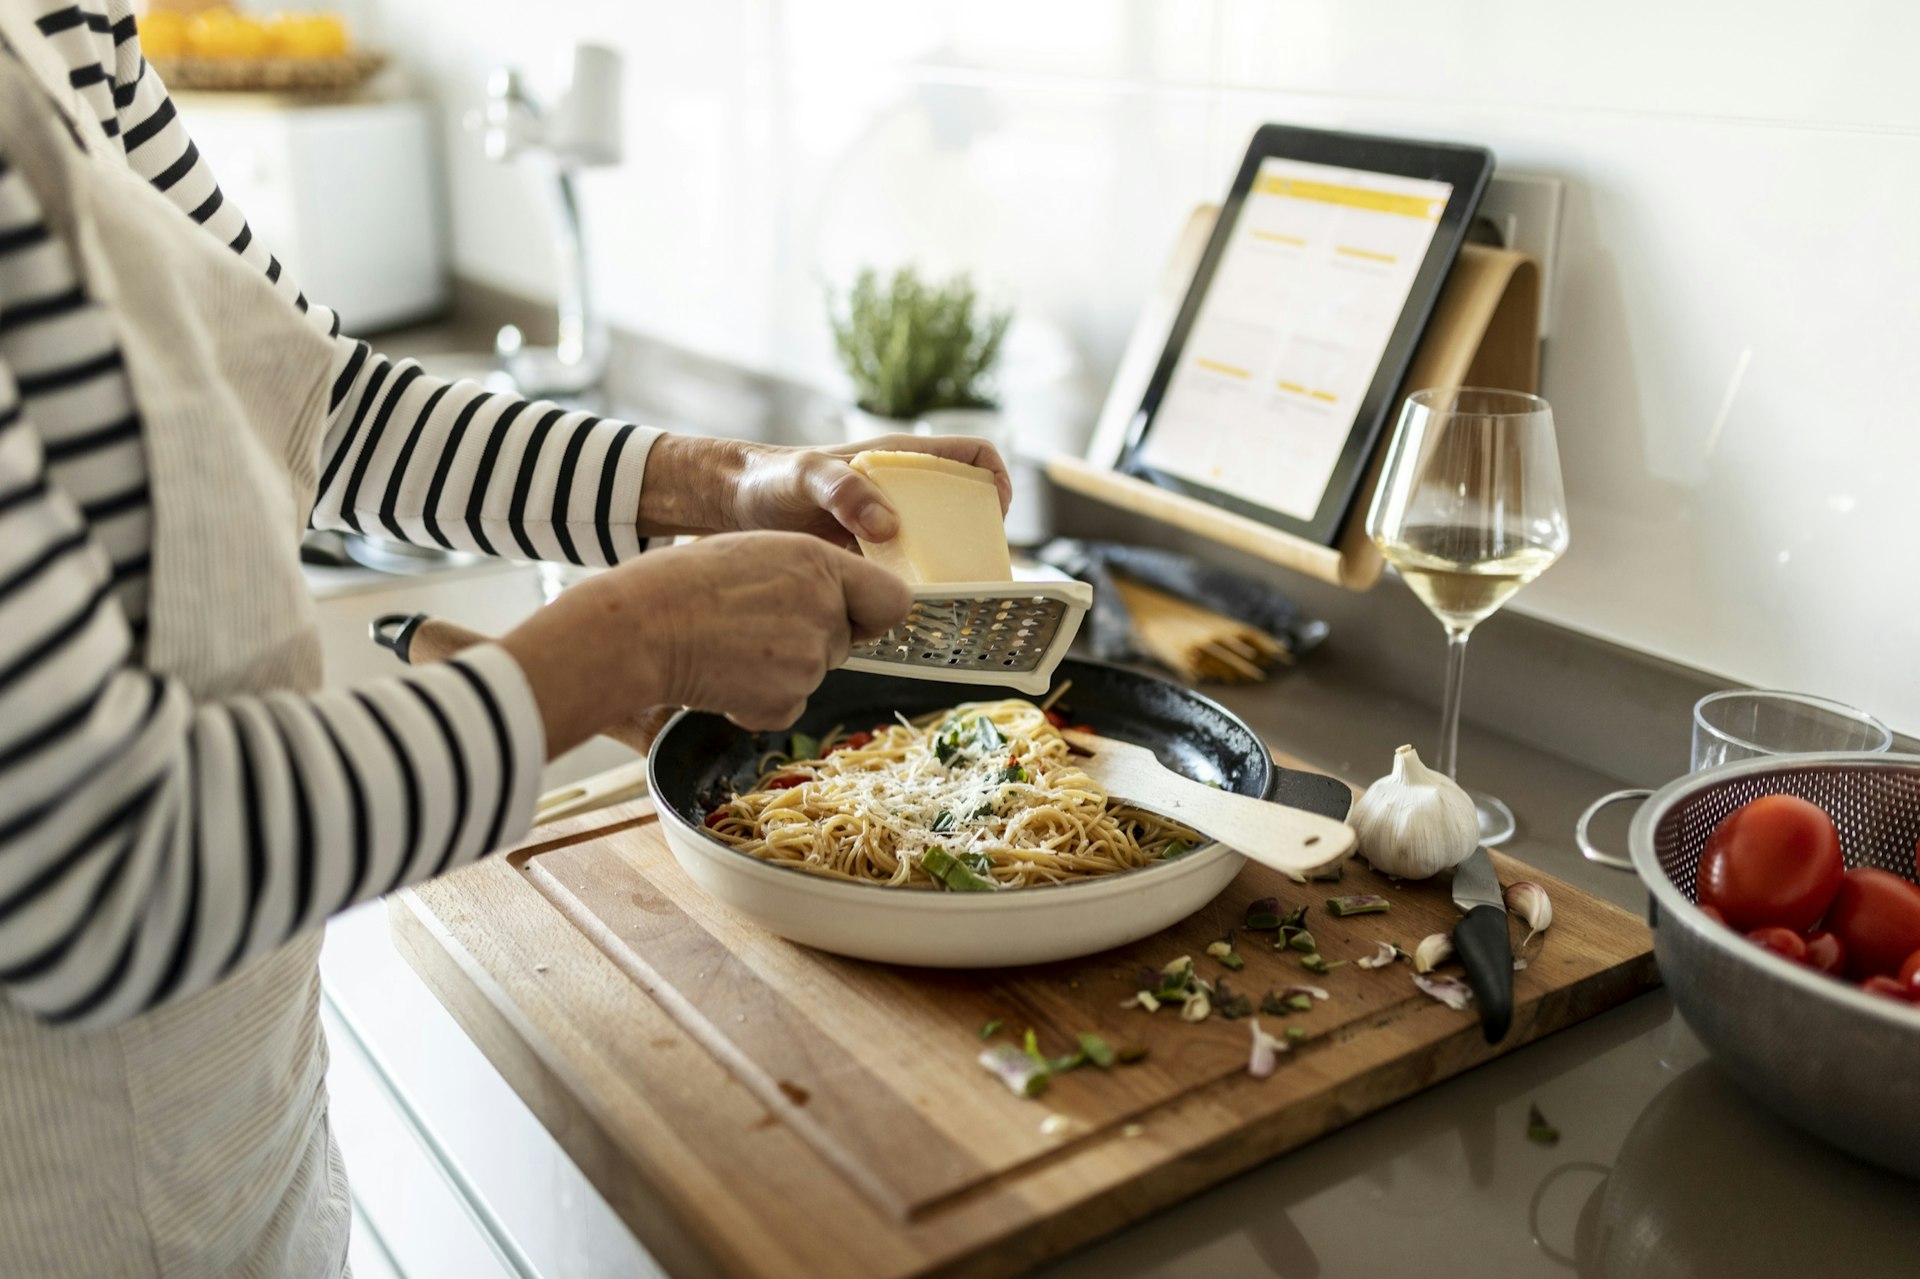 Close-up of woman with tablet shaving cheese over a pasta dish. There is a glass of wine night to the cutting board.